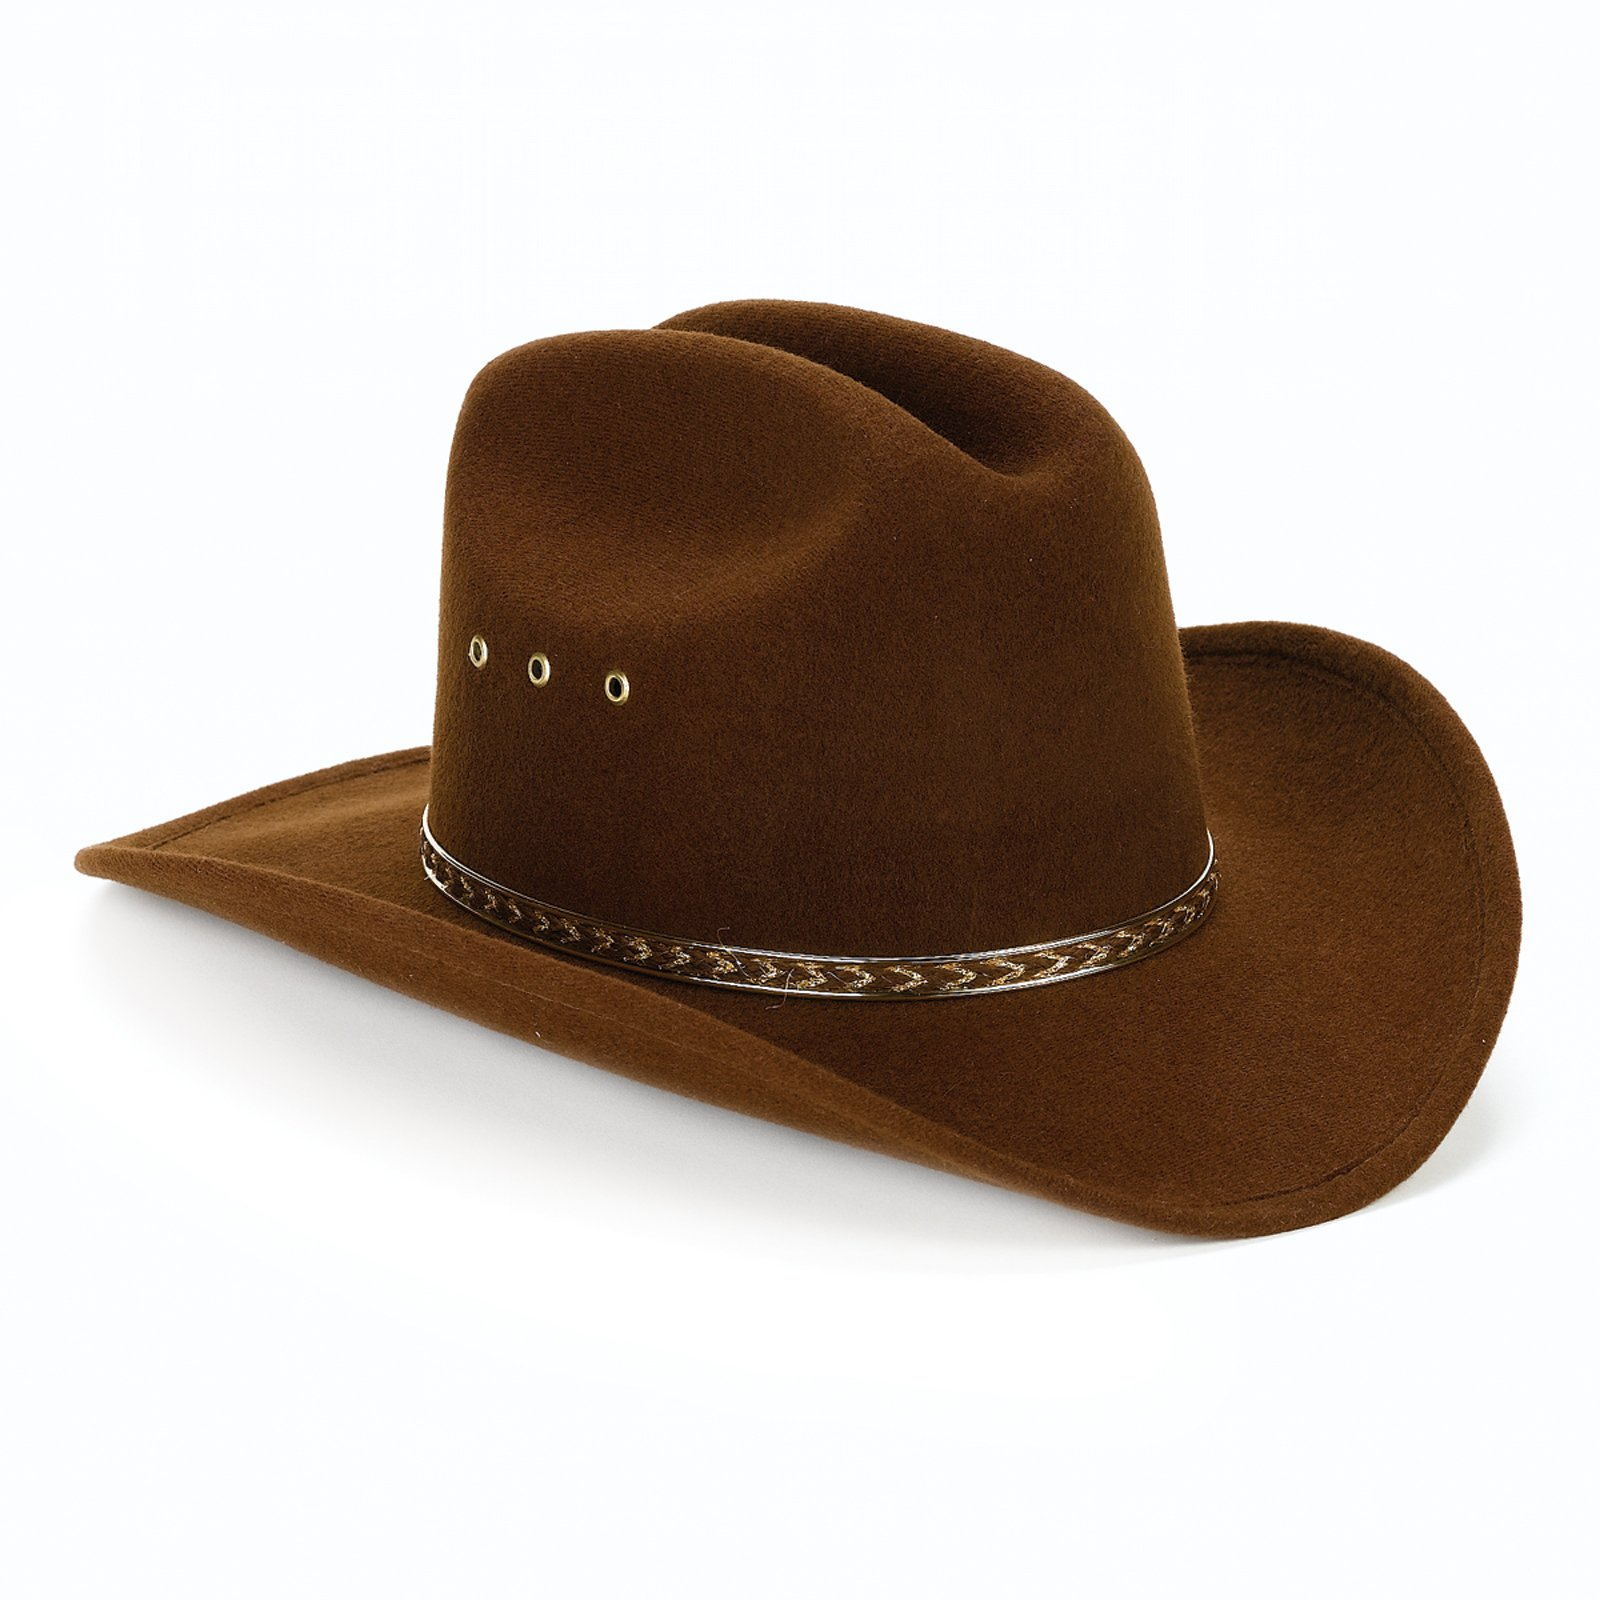 Cowboy Hat | Free Images at Clipart library - vector clip art online 